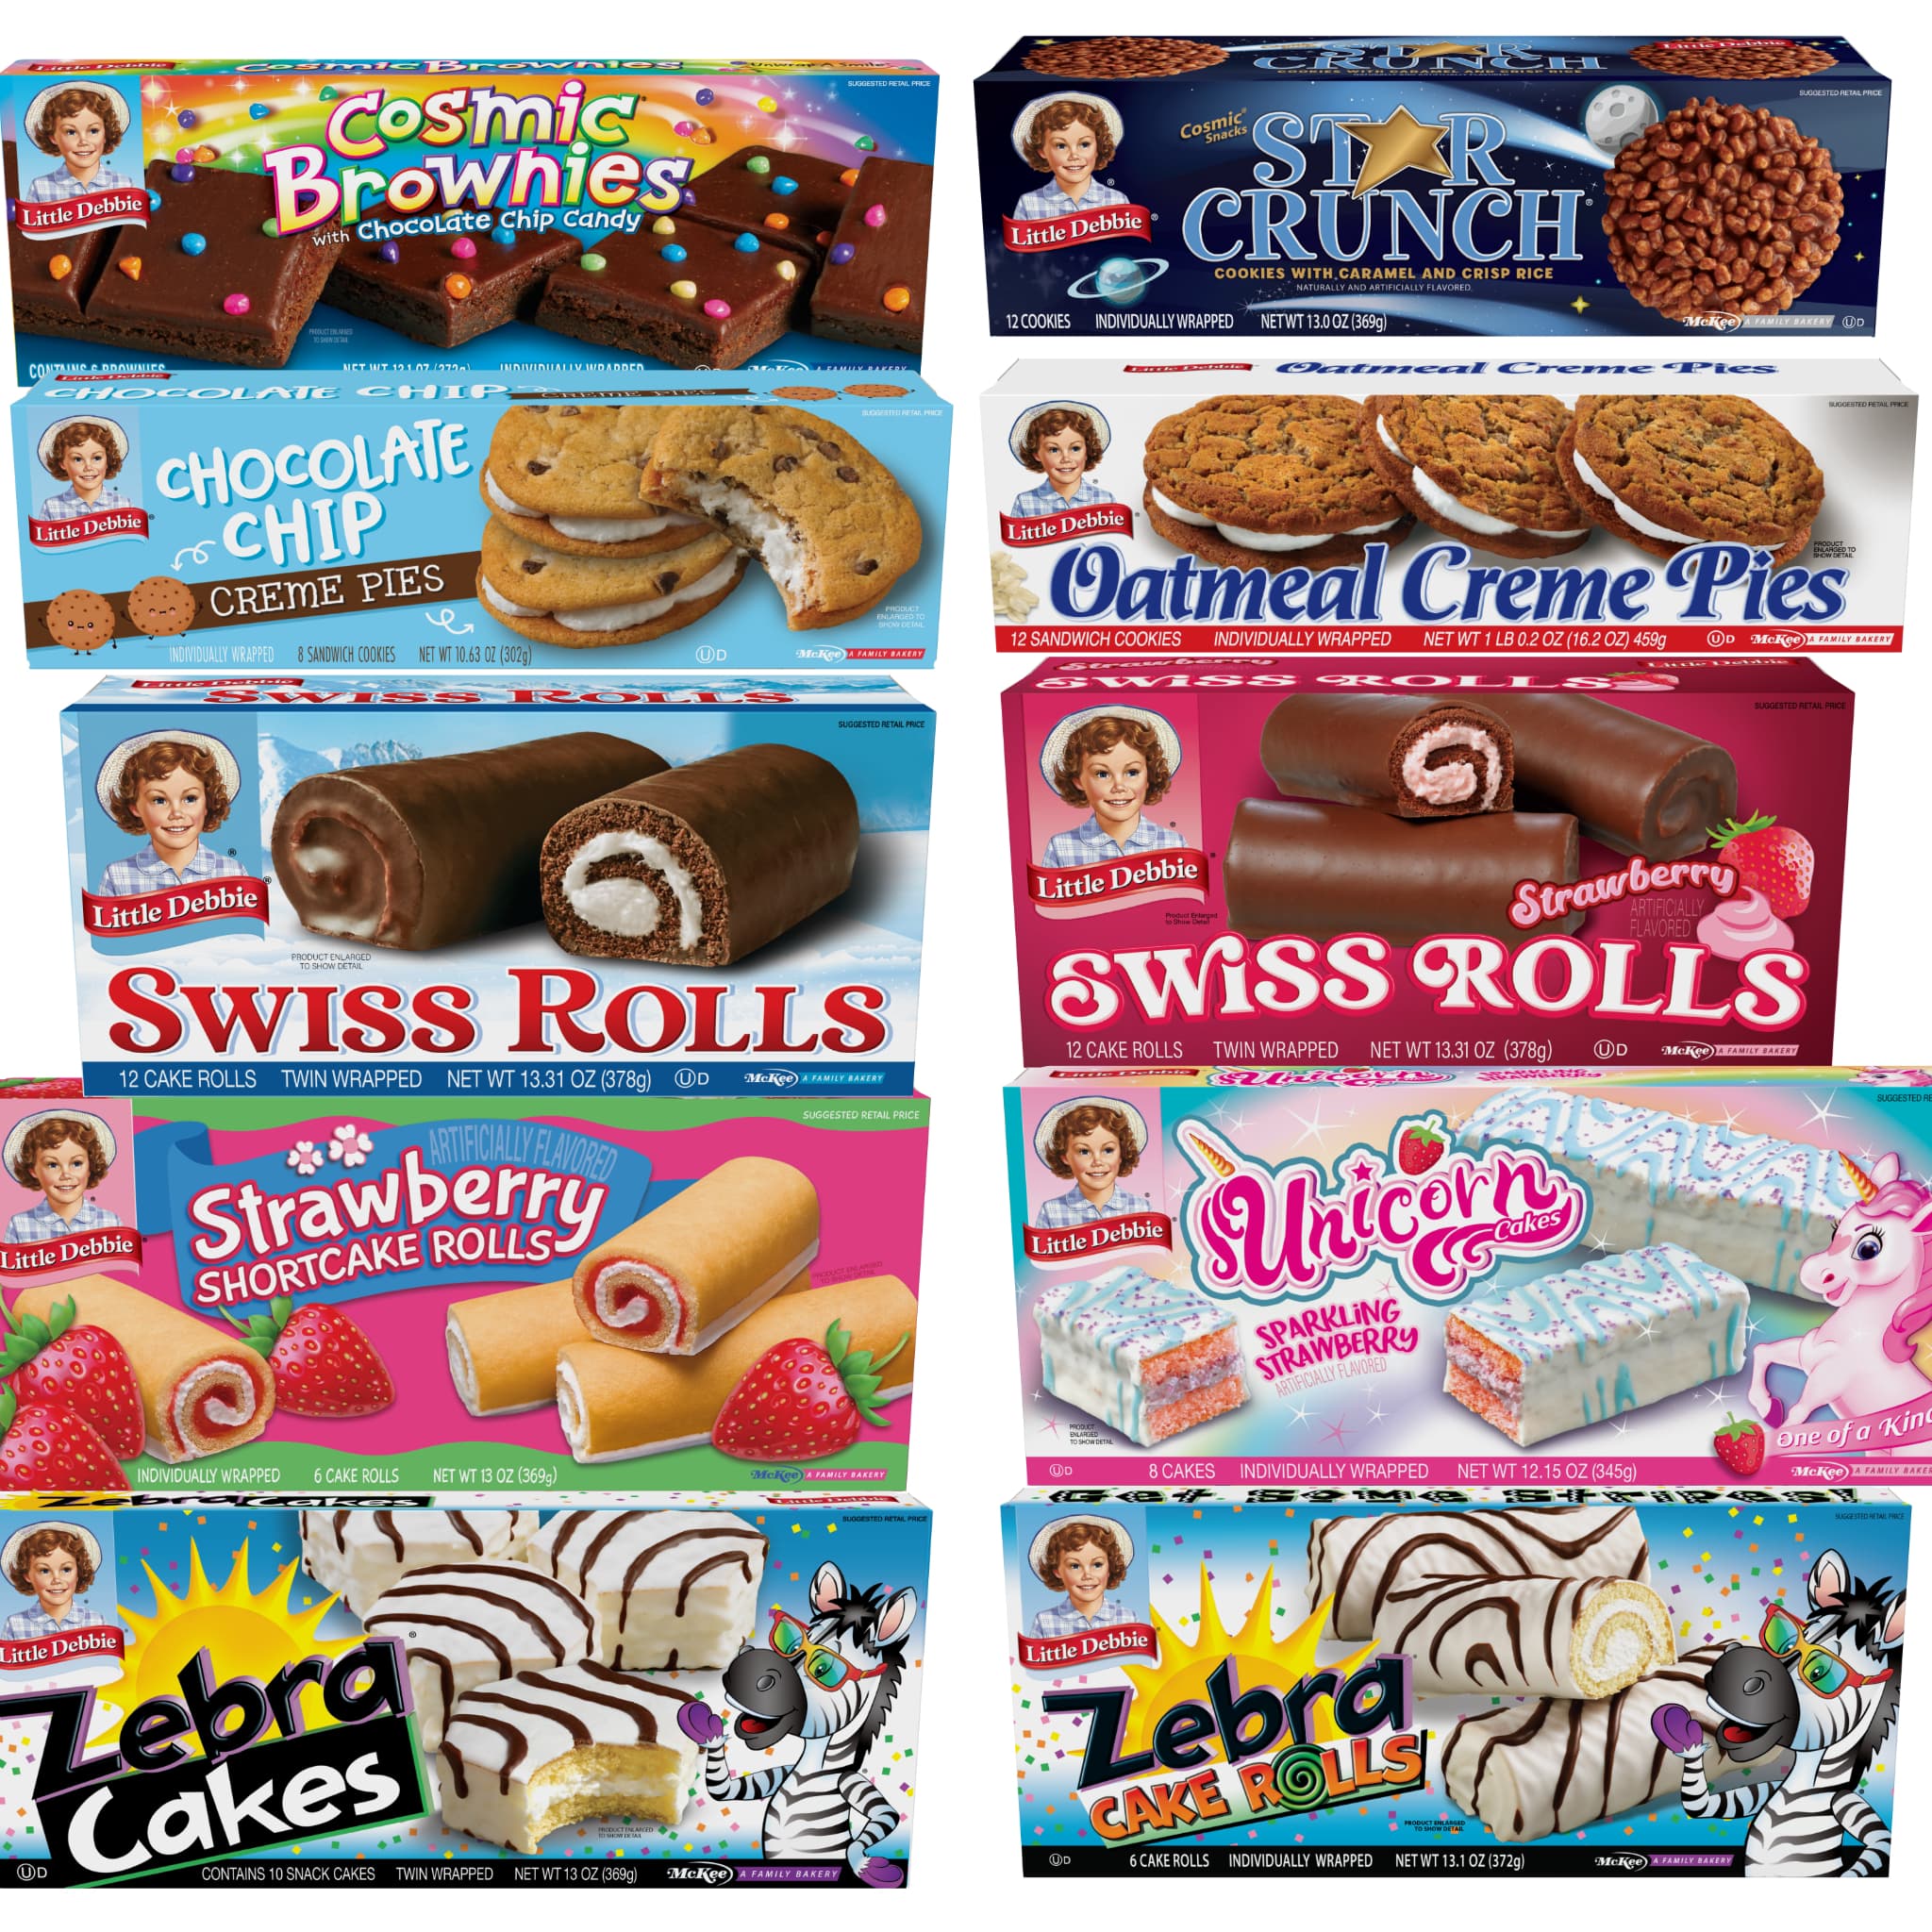  A collection of Little Debbie snacks displayed together, including one carton each of Cosmic Brownies, Star Crunch Cosmic Snacks Cookies, Chocolate Chip Creme Pies, Oatmeal Creme Pies, Swiss Rolls, Strawberry Swiss Rolls, Strawberry Shortcake Rolls, Unicorn Cakes, Zebra Cakes, and Zebra Cake Rolls. Each carton features colorful packaging with images of the respective treats.